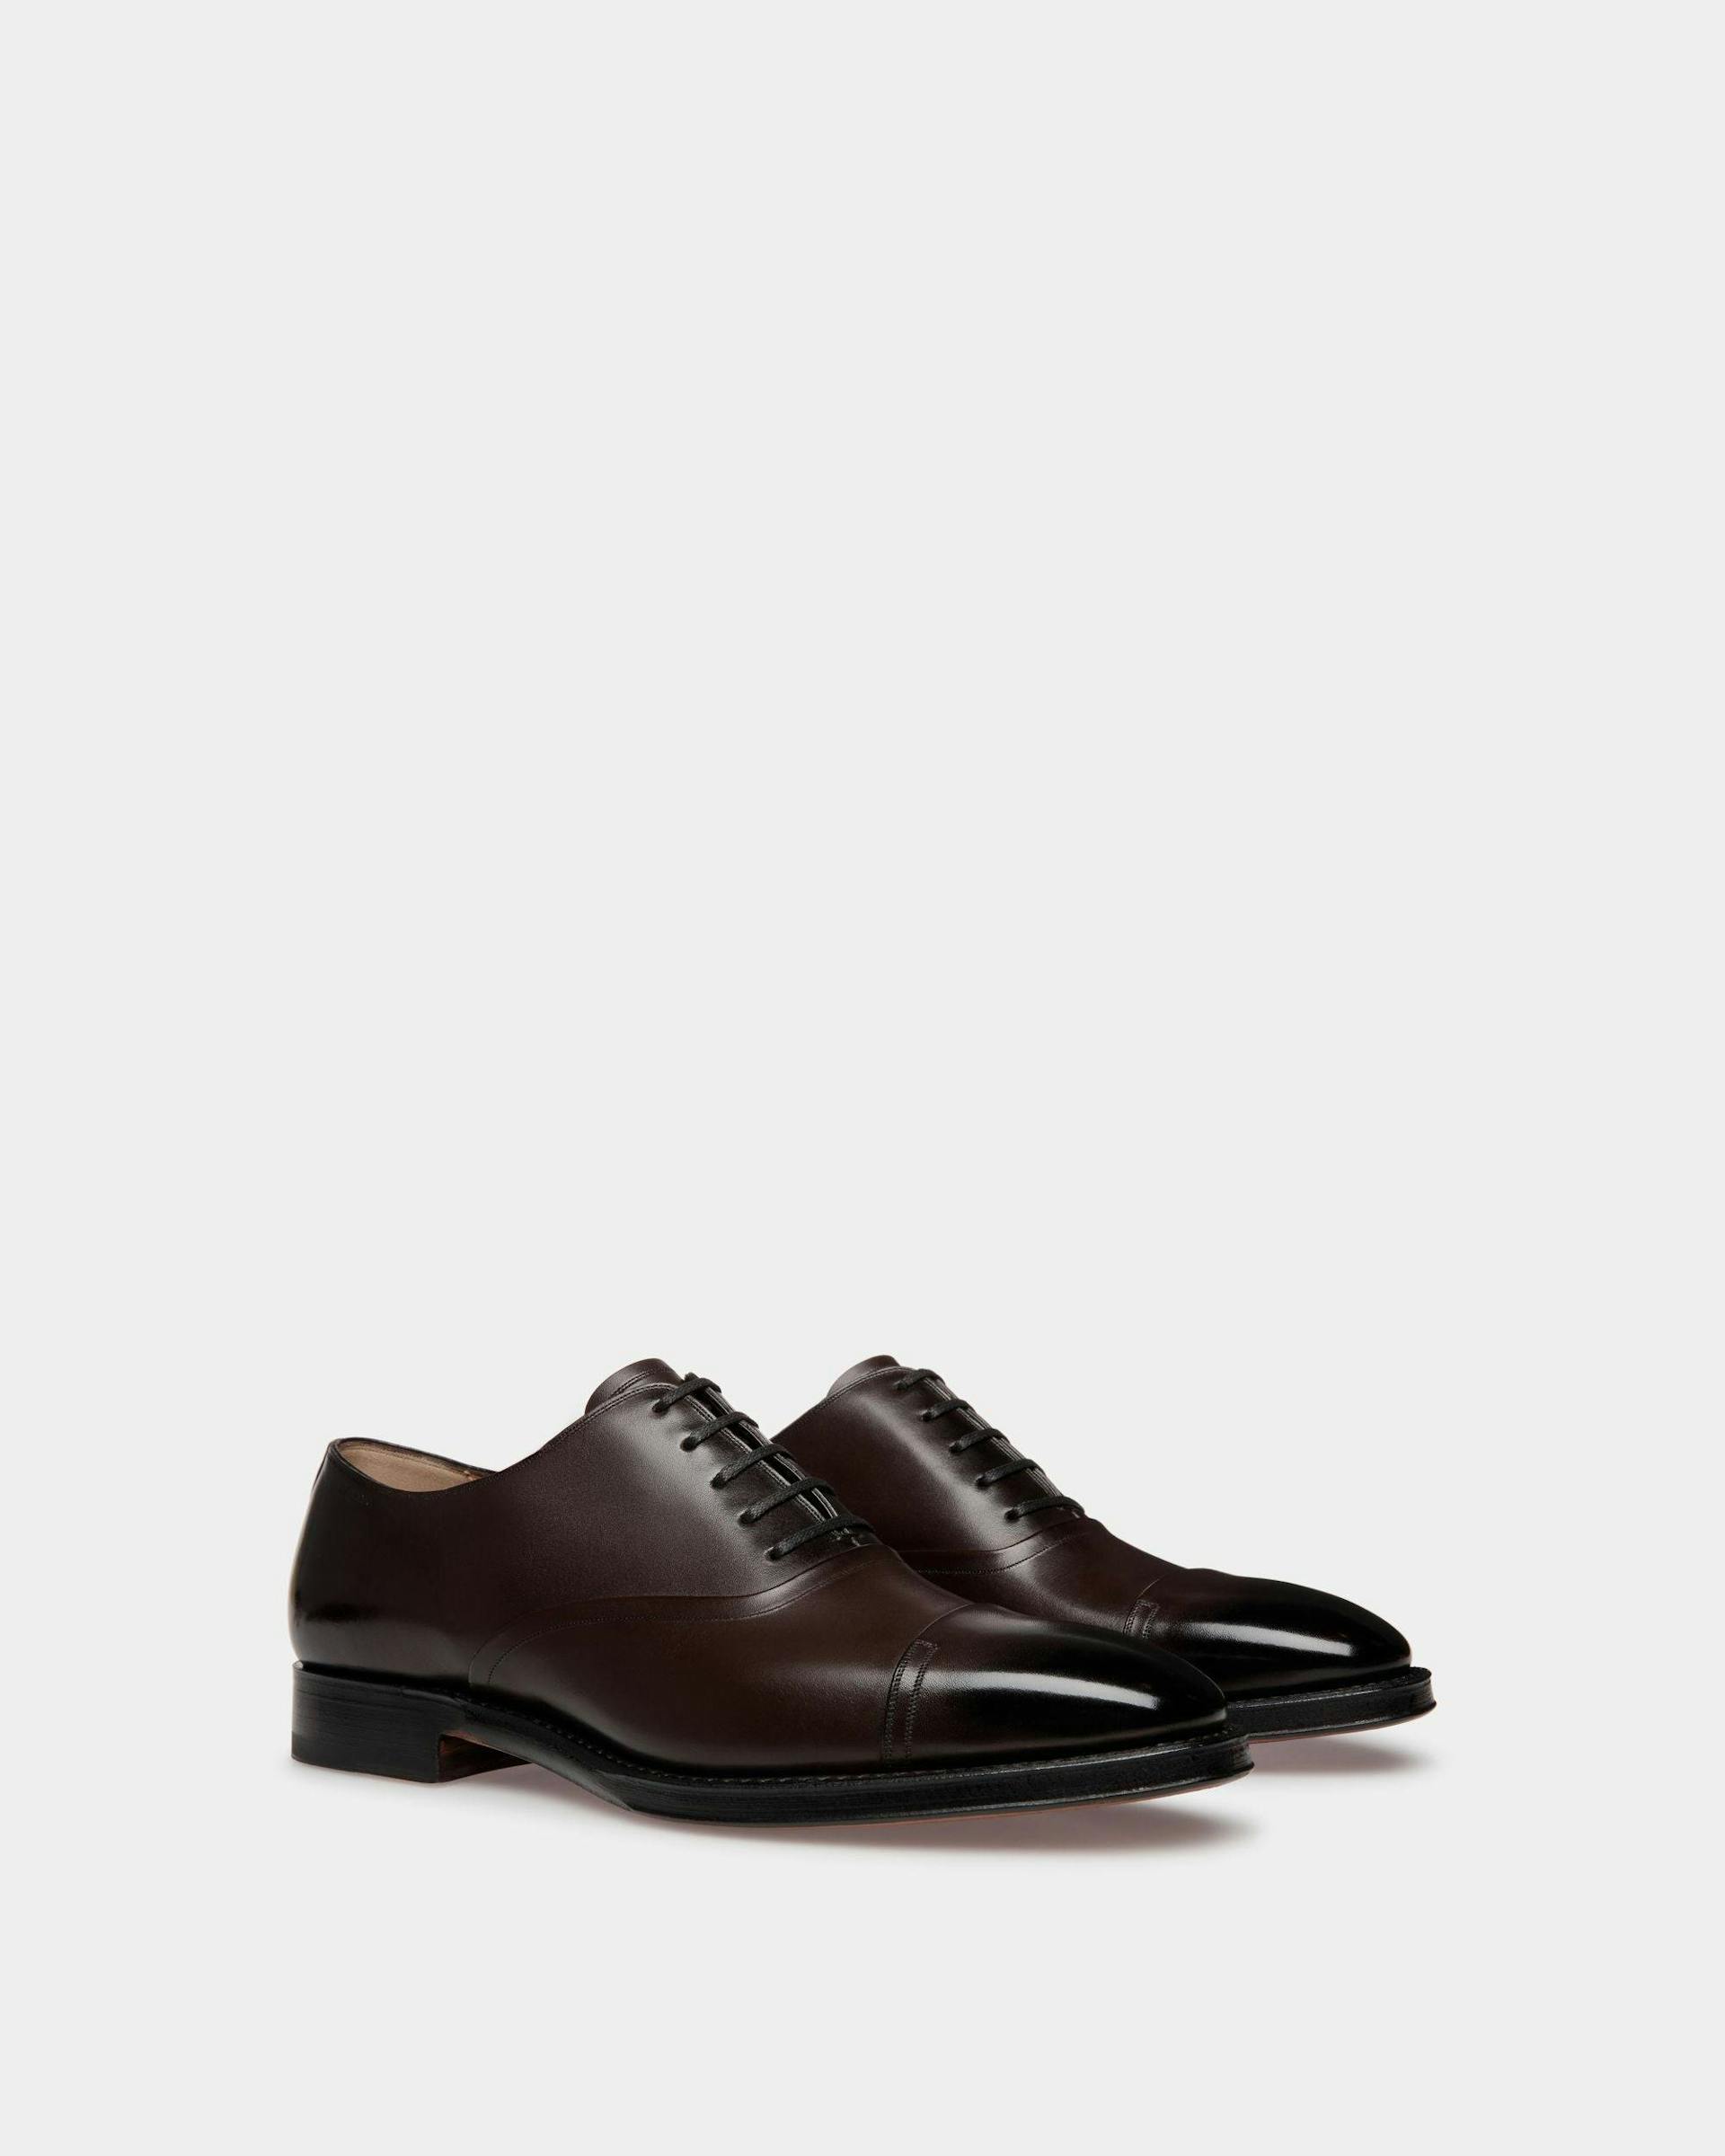 Scribe Oxford Shoes In Brown Leather - Men's - Bally - 02